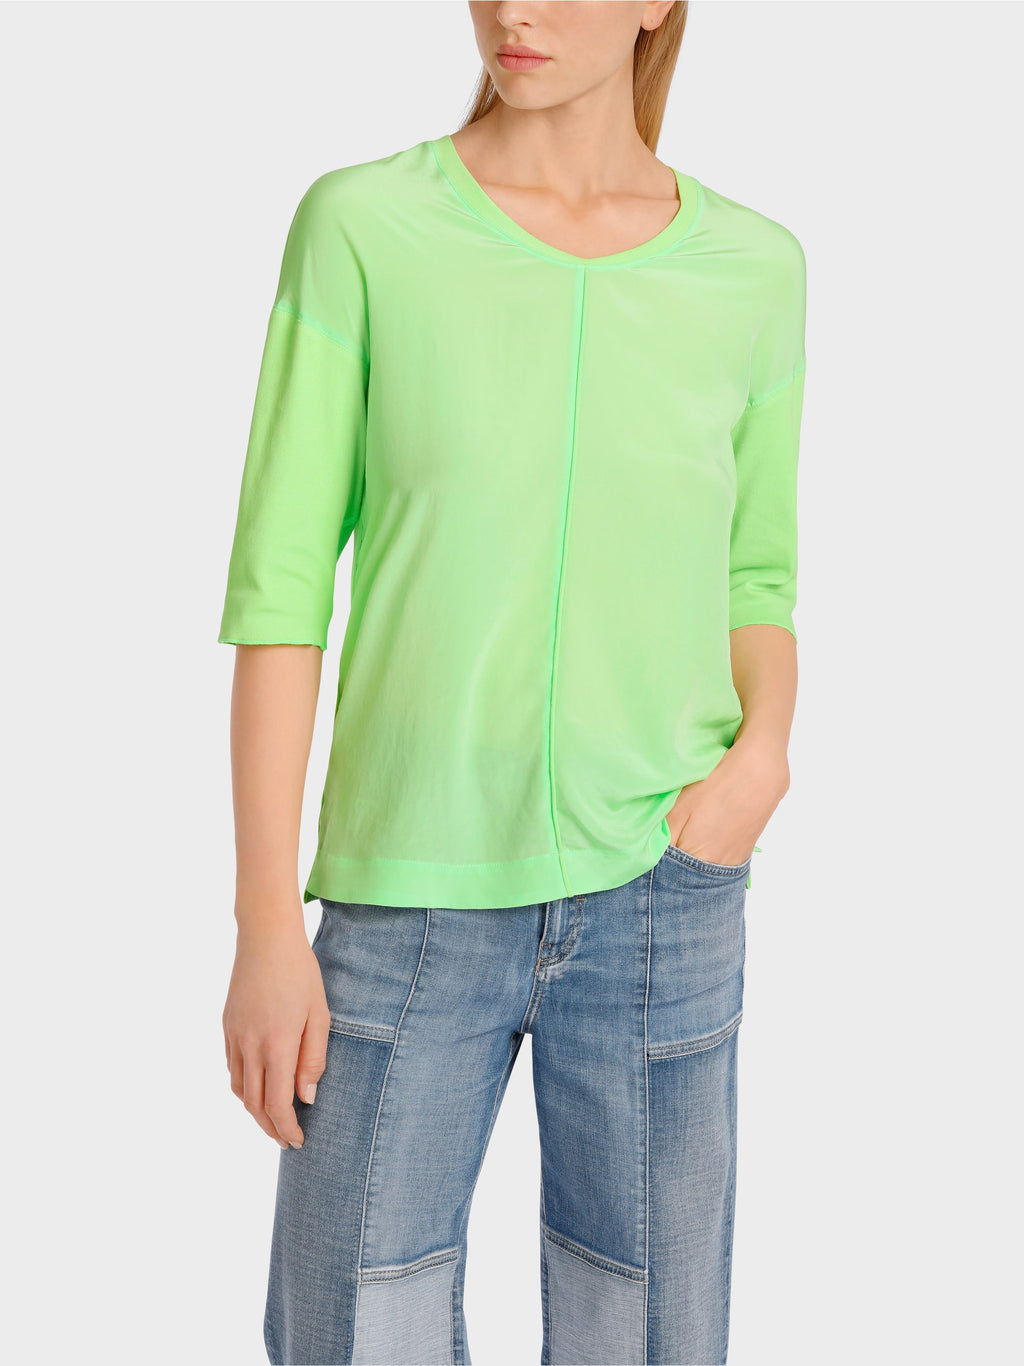 apple green casual blouse